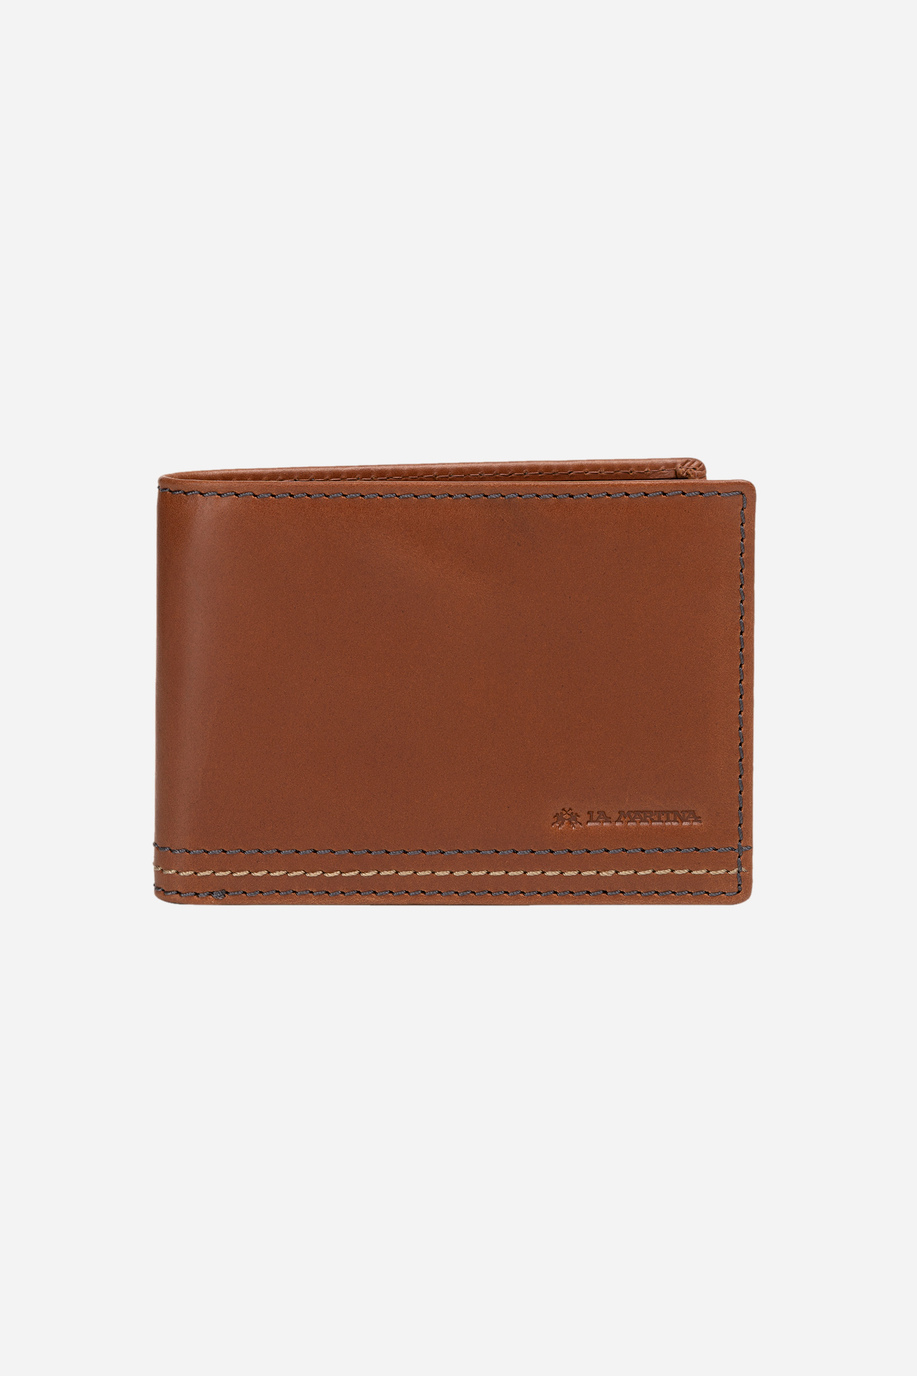 Men's leather wallet - Axel - Wallets and key chains | La Martina - Official Online Shop